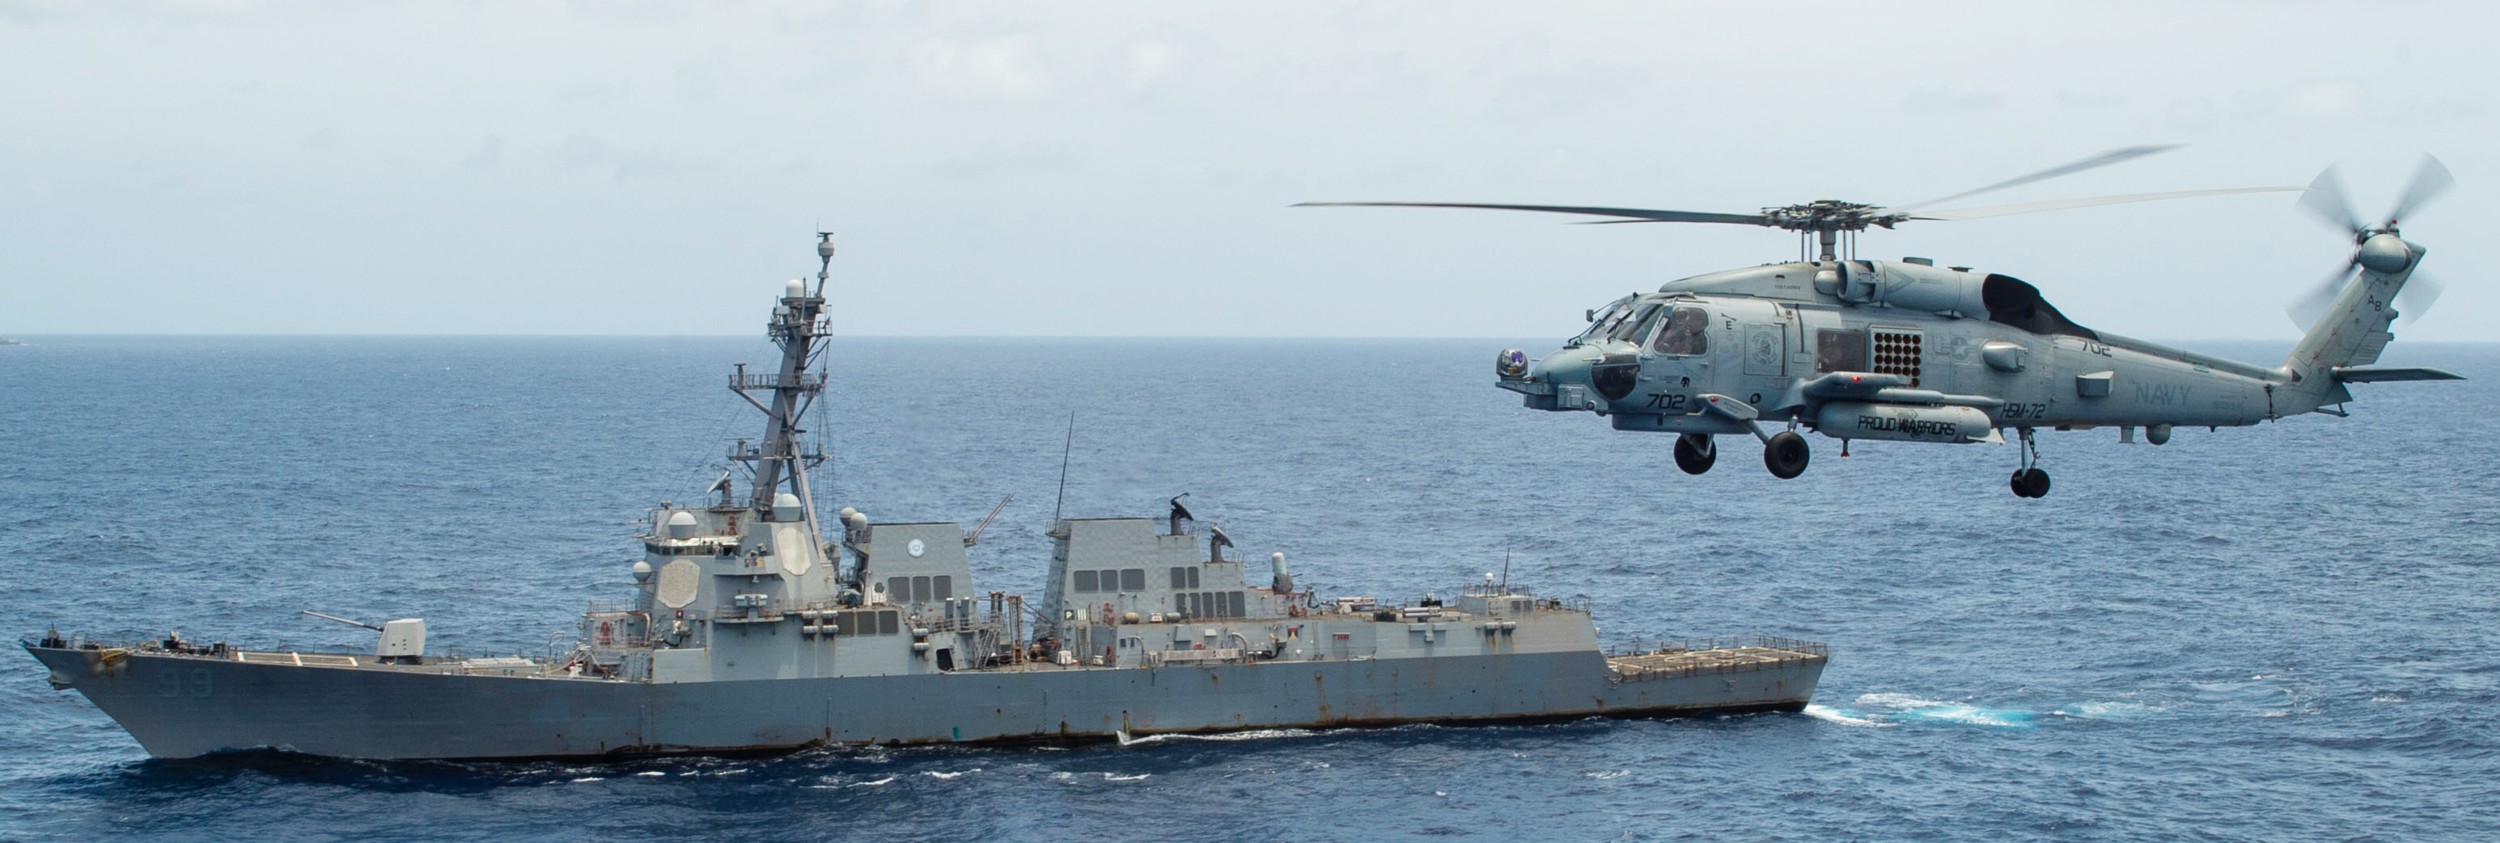 hsm-72 proud warriors helicopter maritime strike squadron mh-60r seahawk carrier air wing cvw-1 ddg-99 uss farragut 52